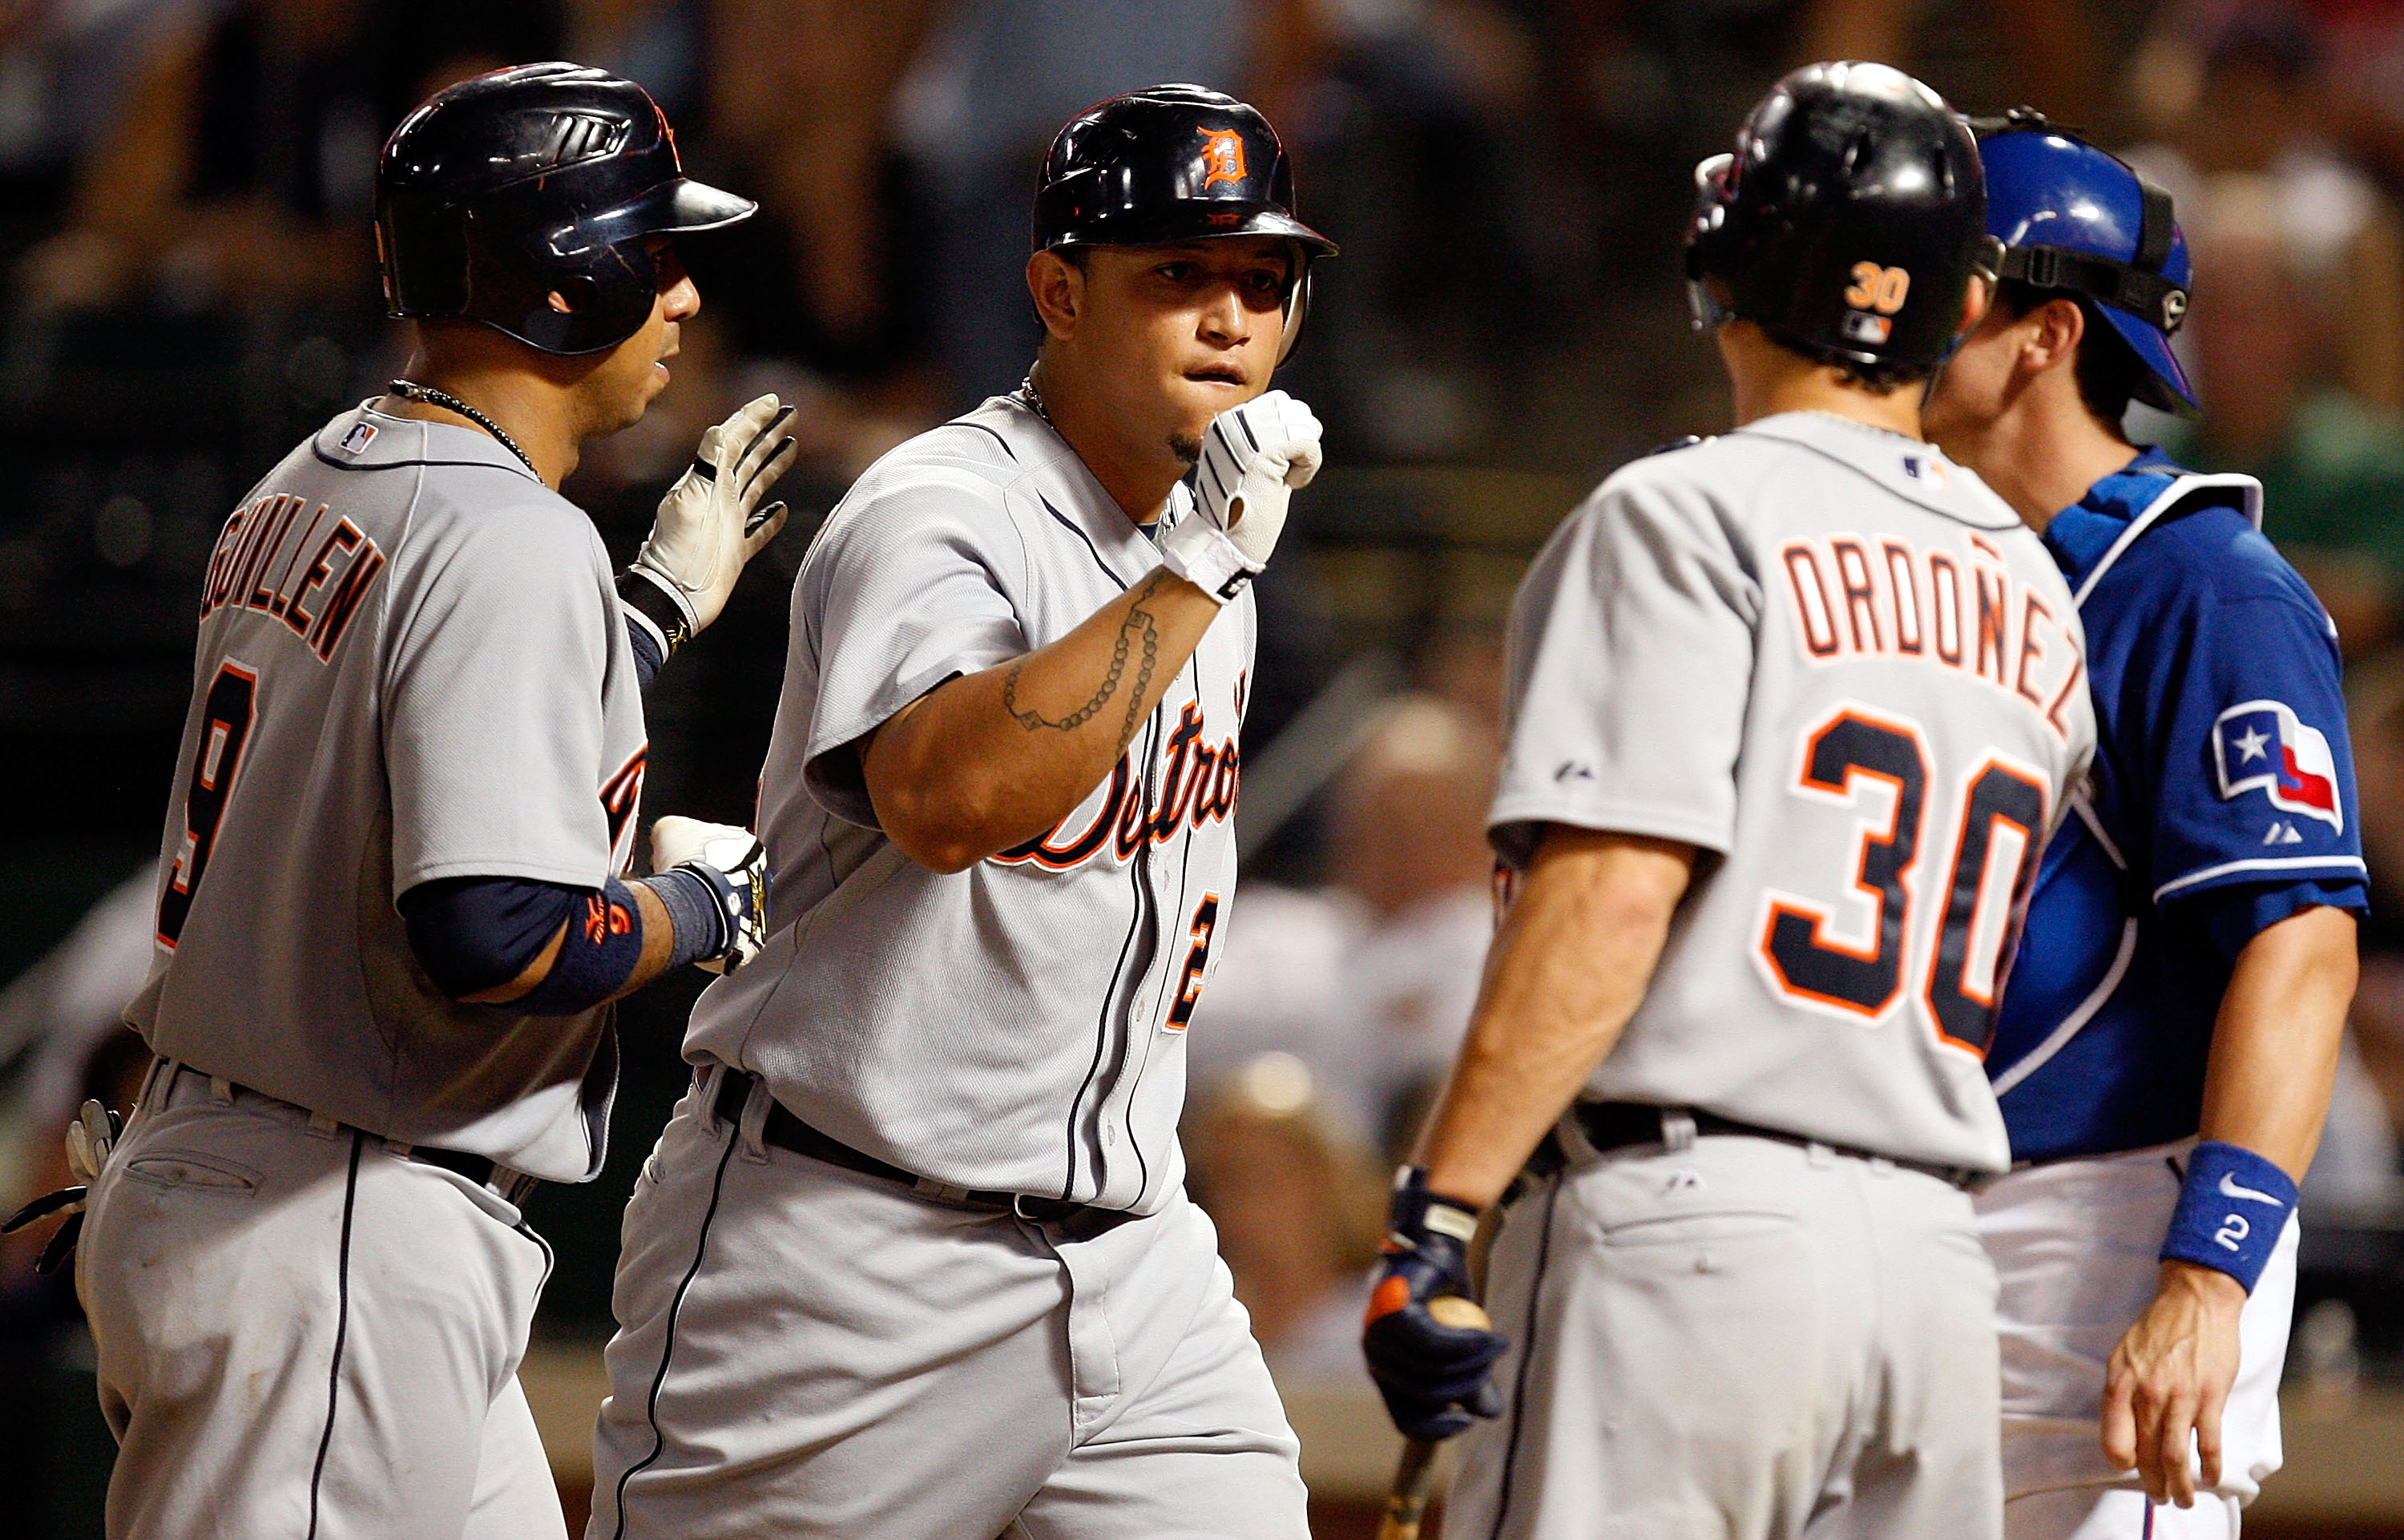 Detroit's dynamic duo of Prince Fielder-Miguel Cabrera are baseball's  newest heavy hitters